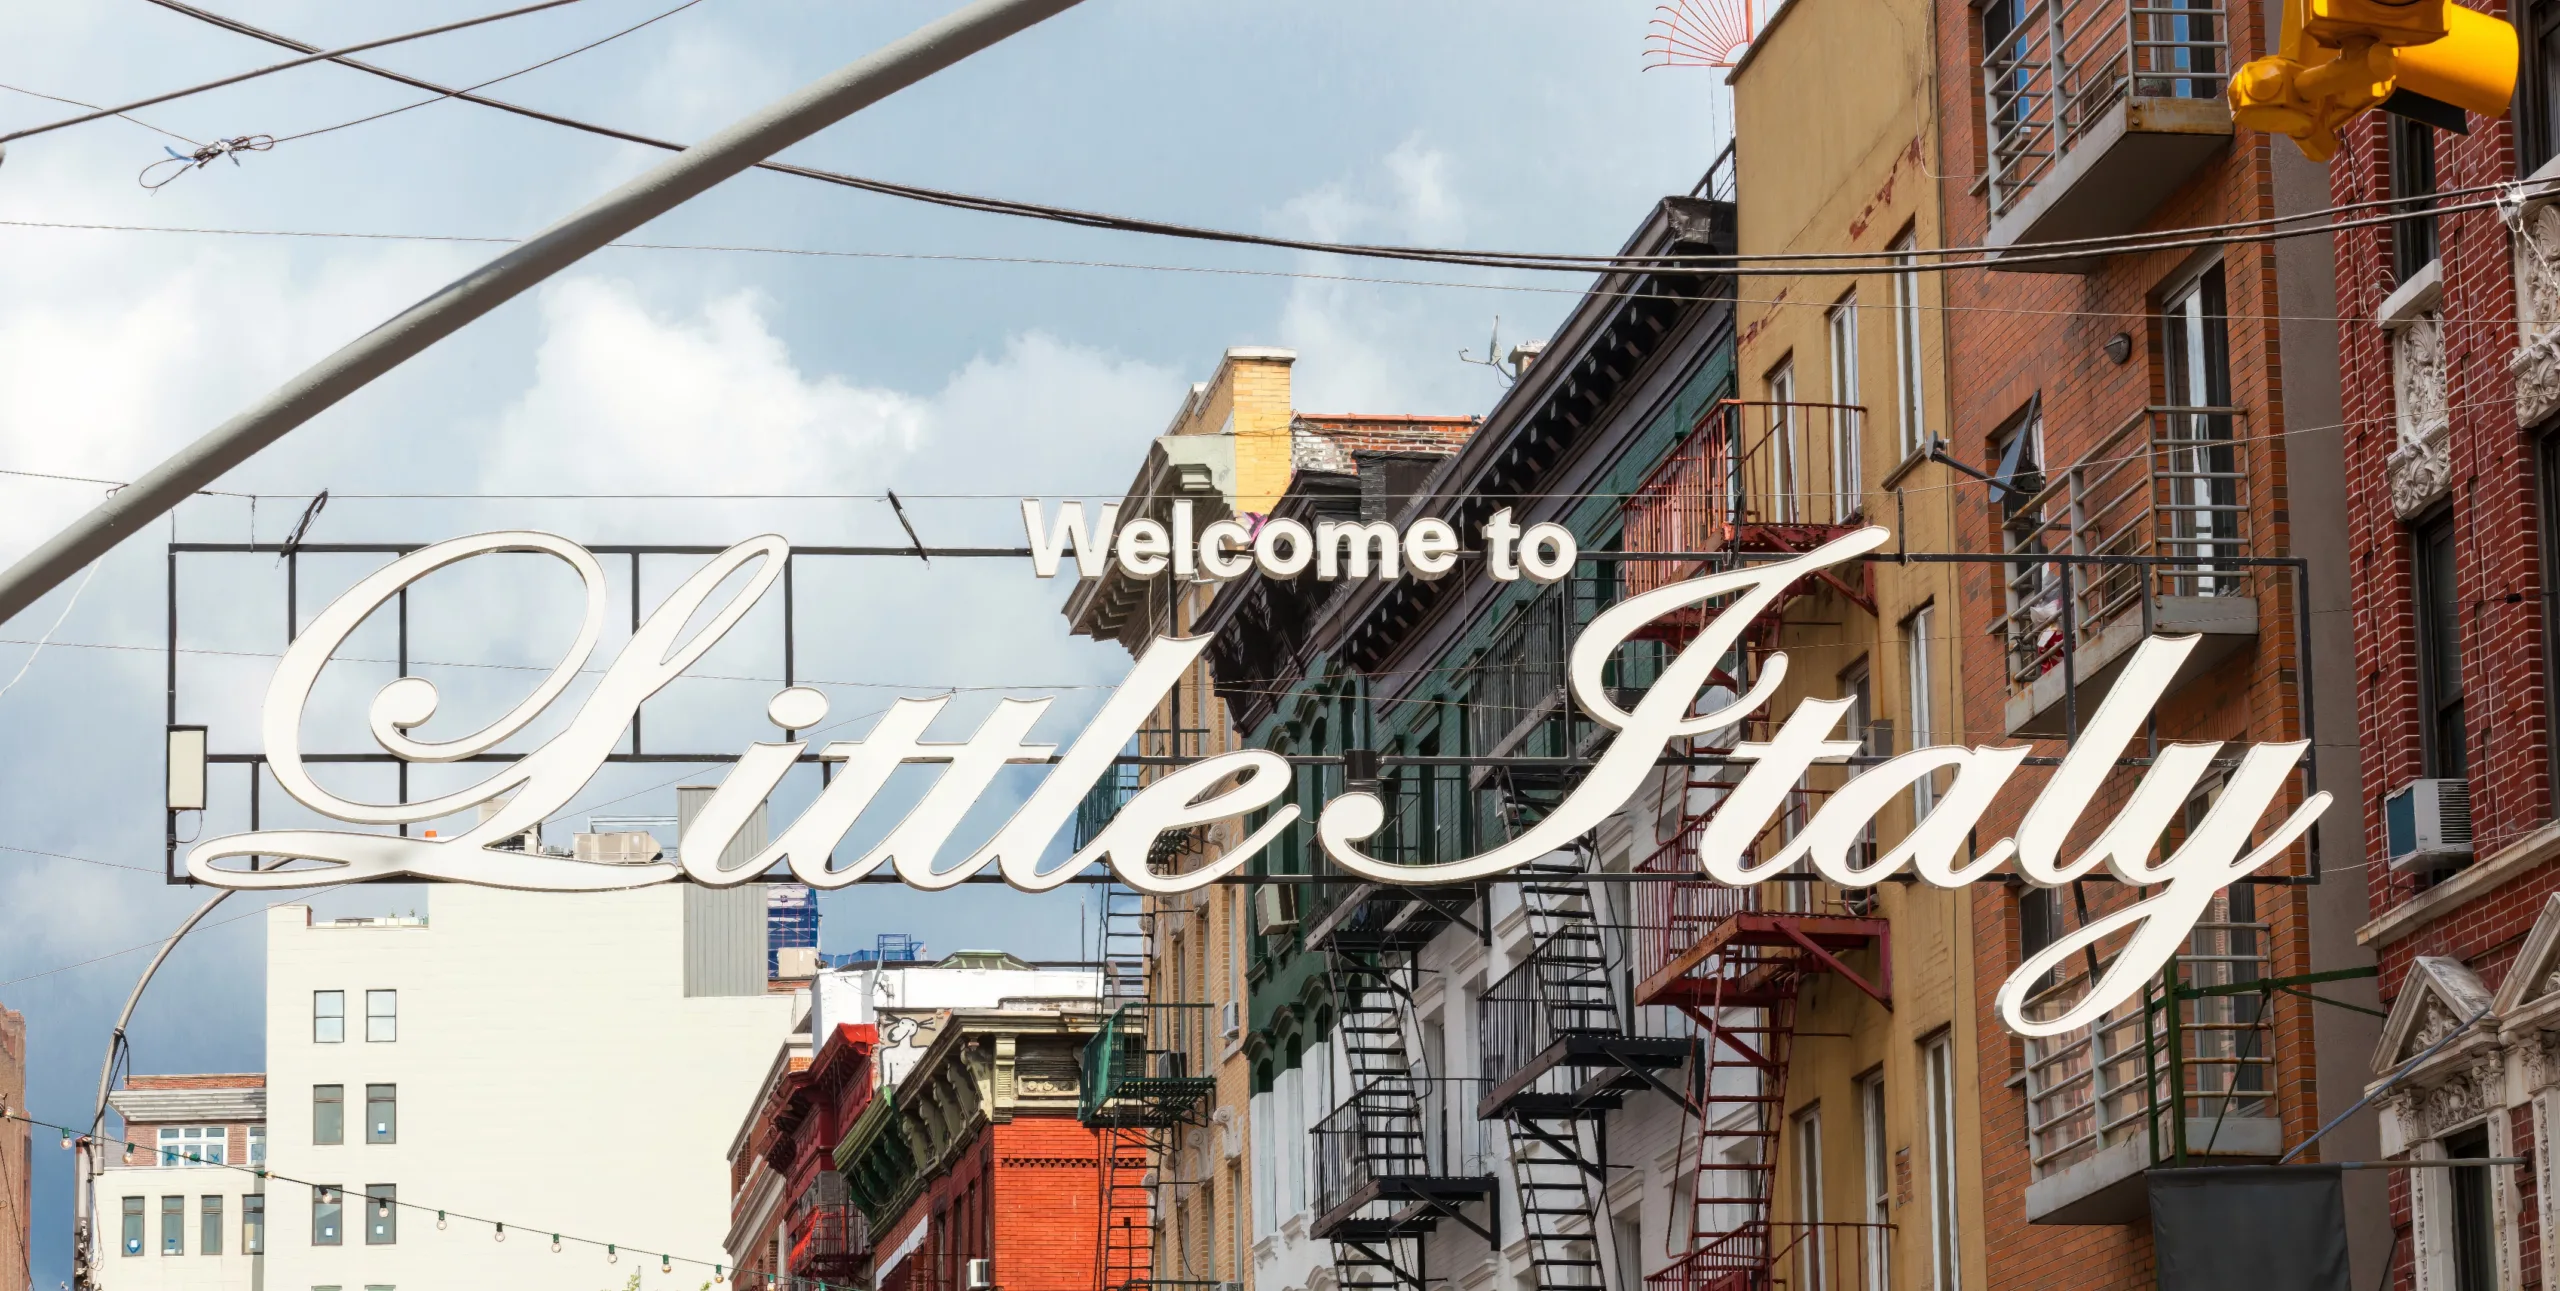 Find out why little Italy is such a popular destination for foodies and tourists alike. Read on to know the reasons